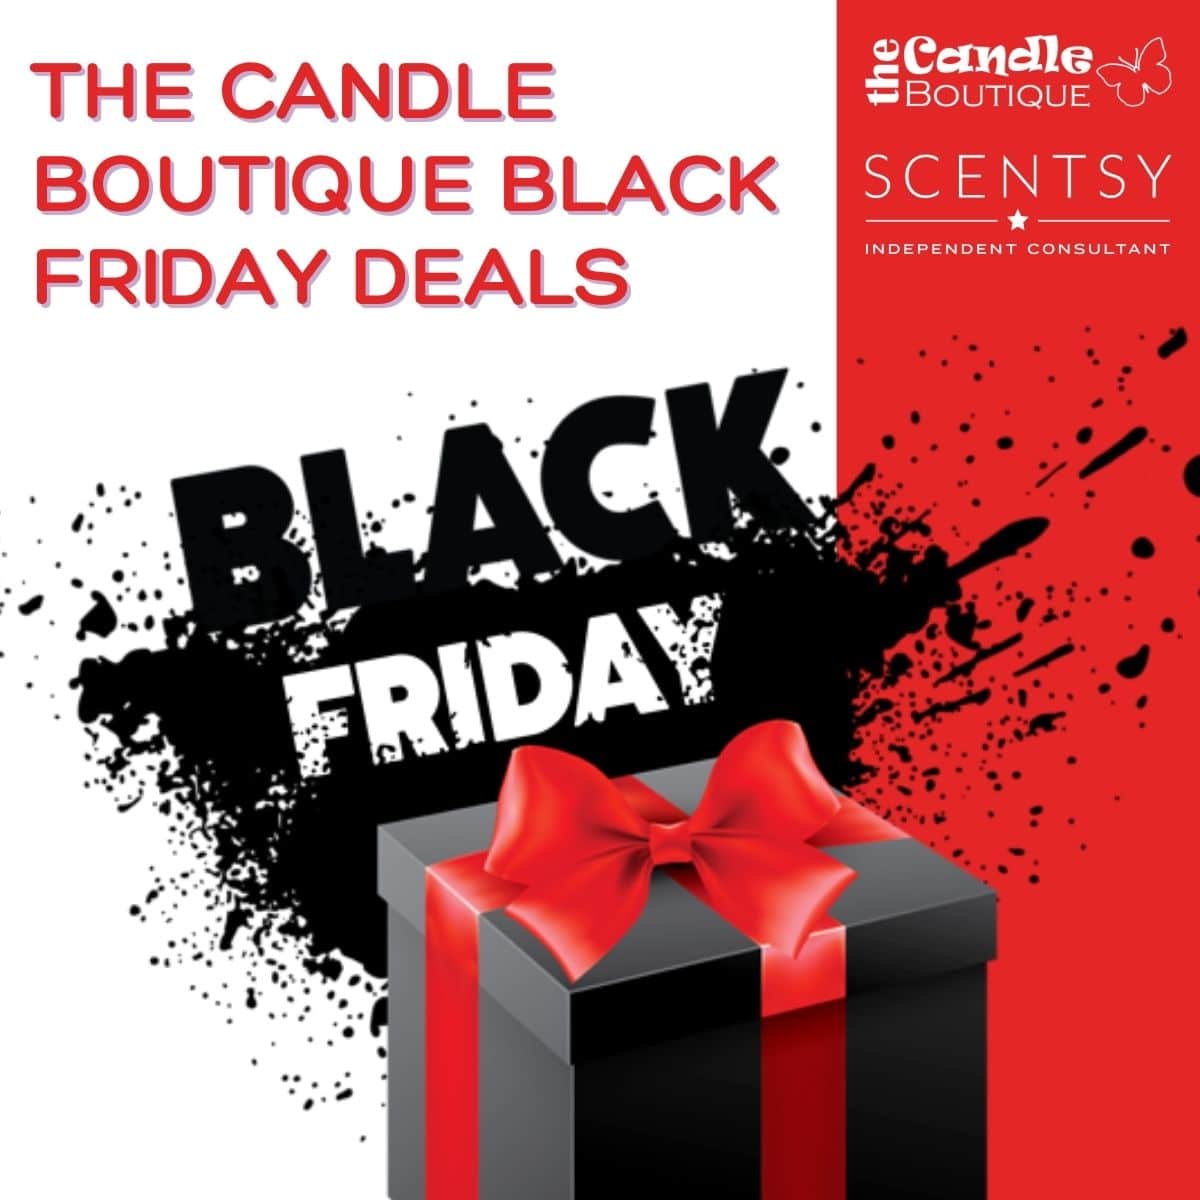 The Candle Boutique Black Friday Deals The Candle Boutique Scentsy